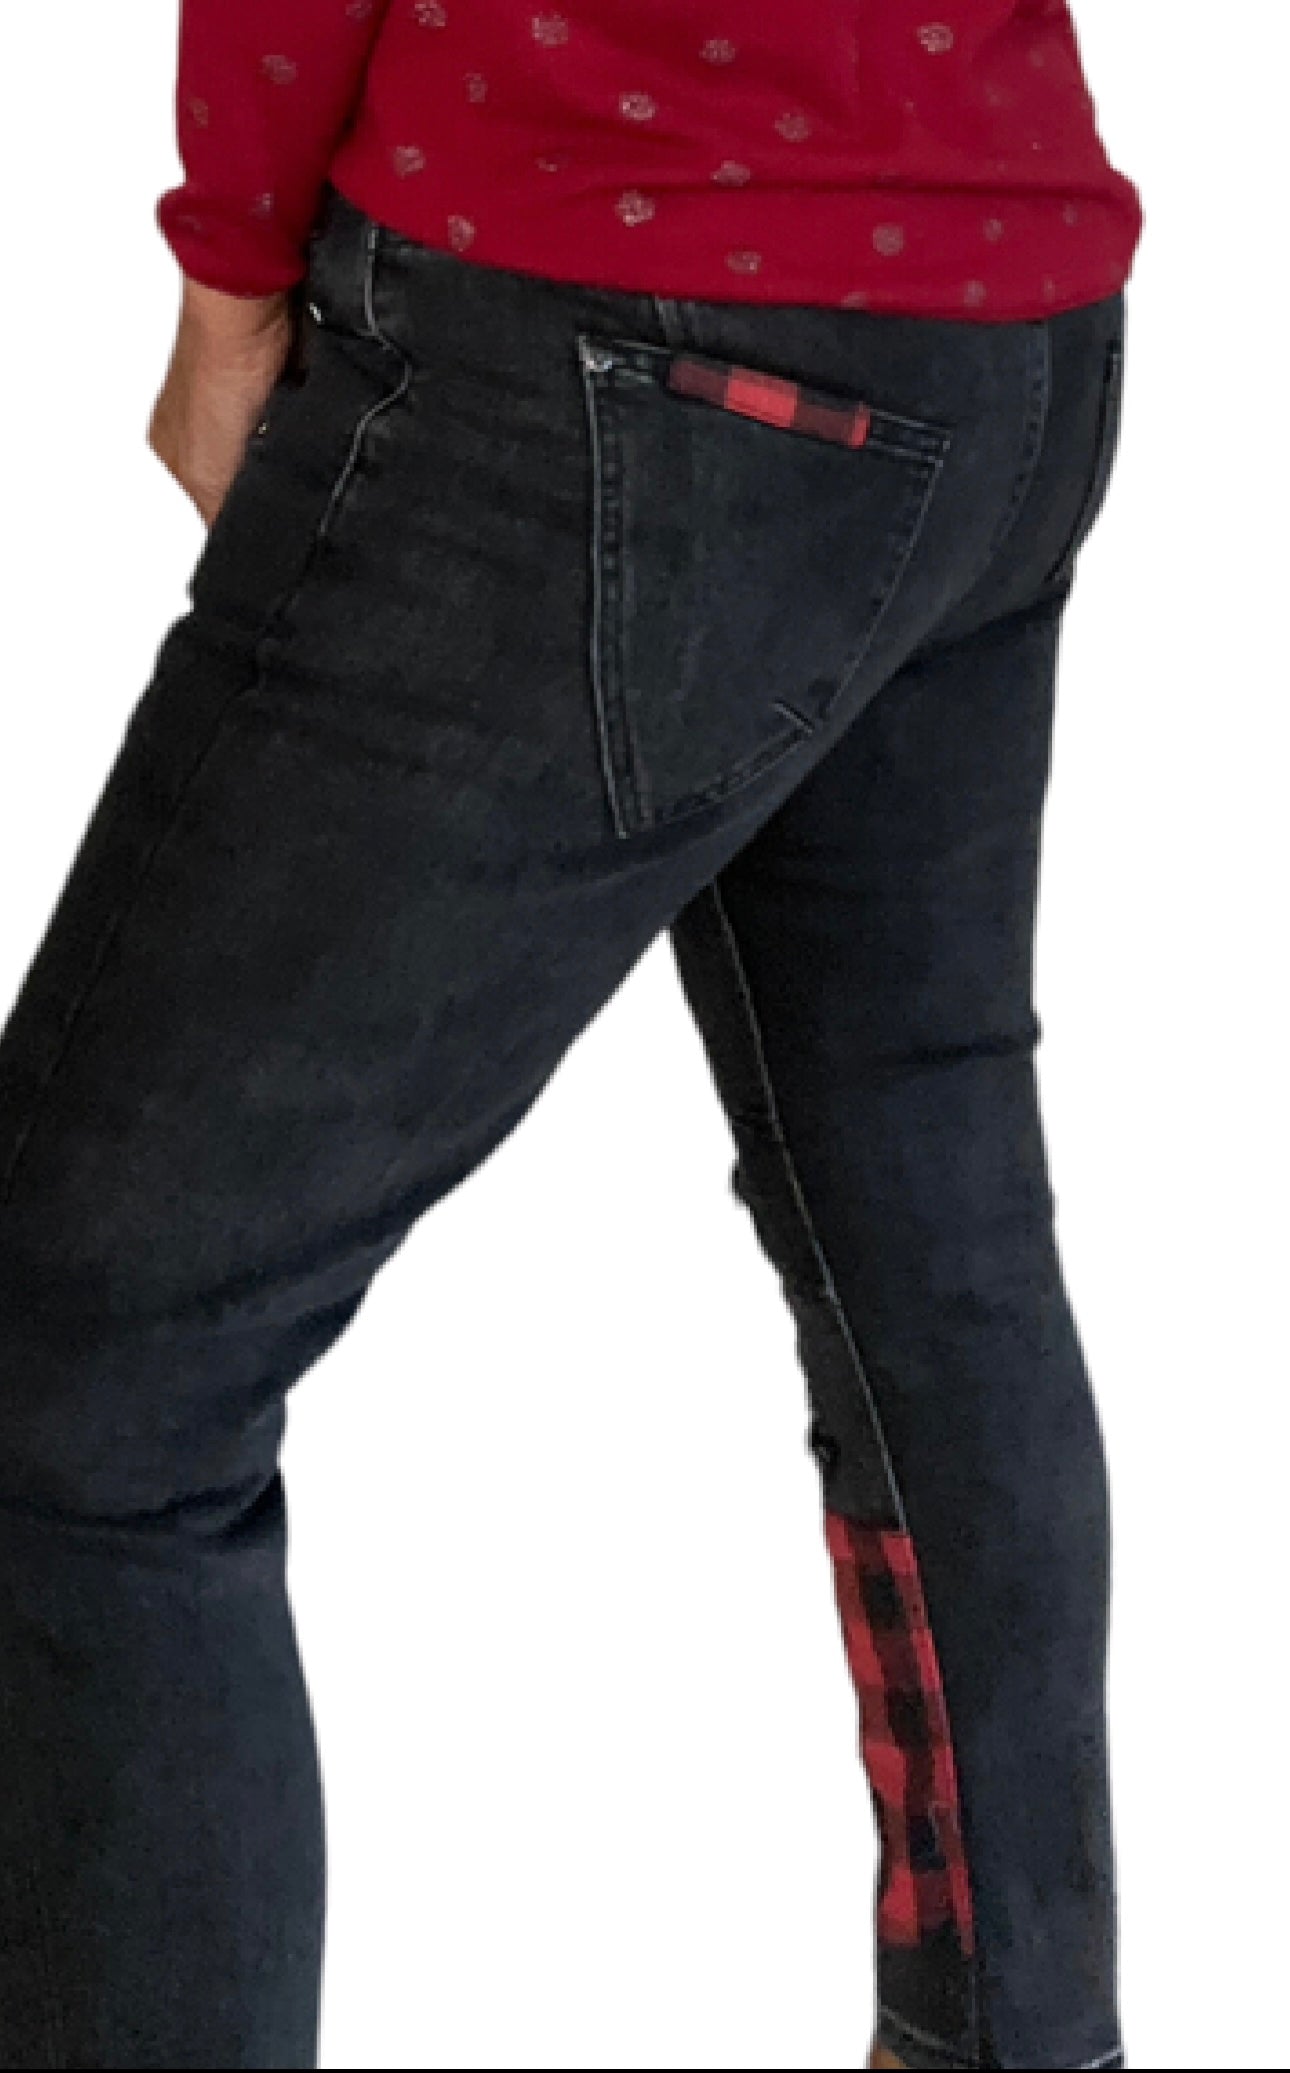 Amici Clothing Frenchy Patch Jeans